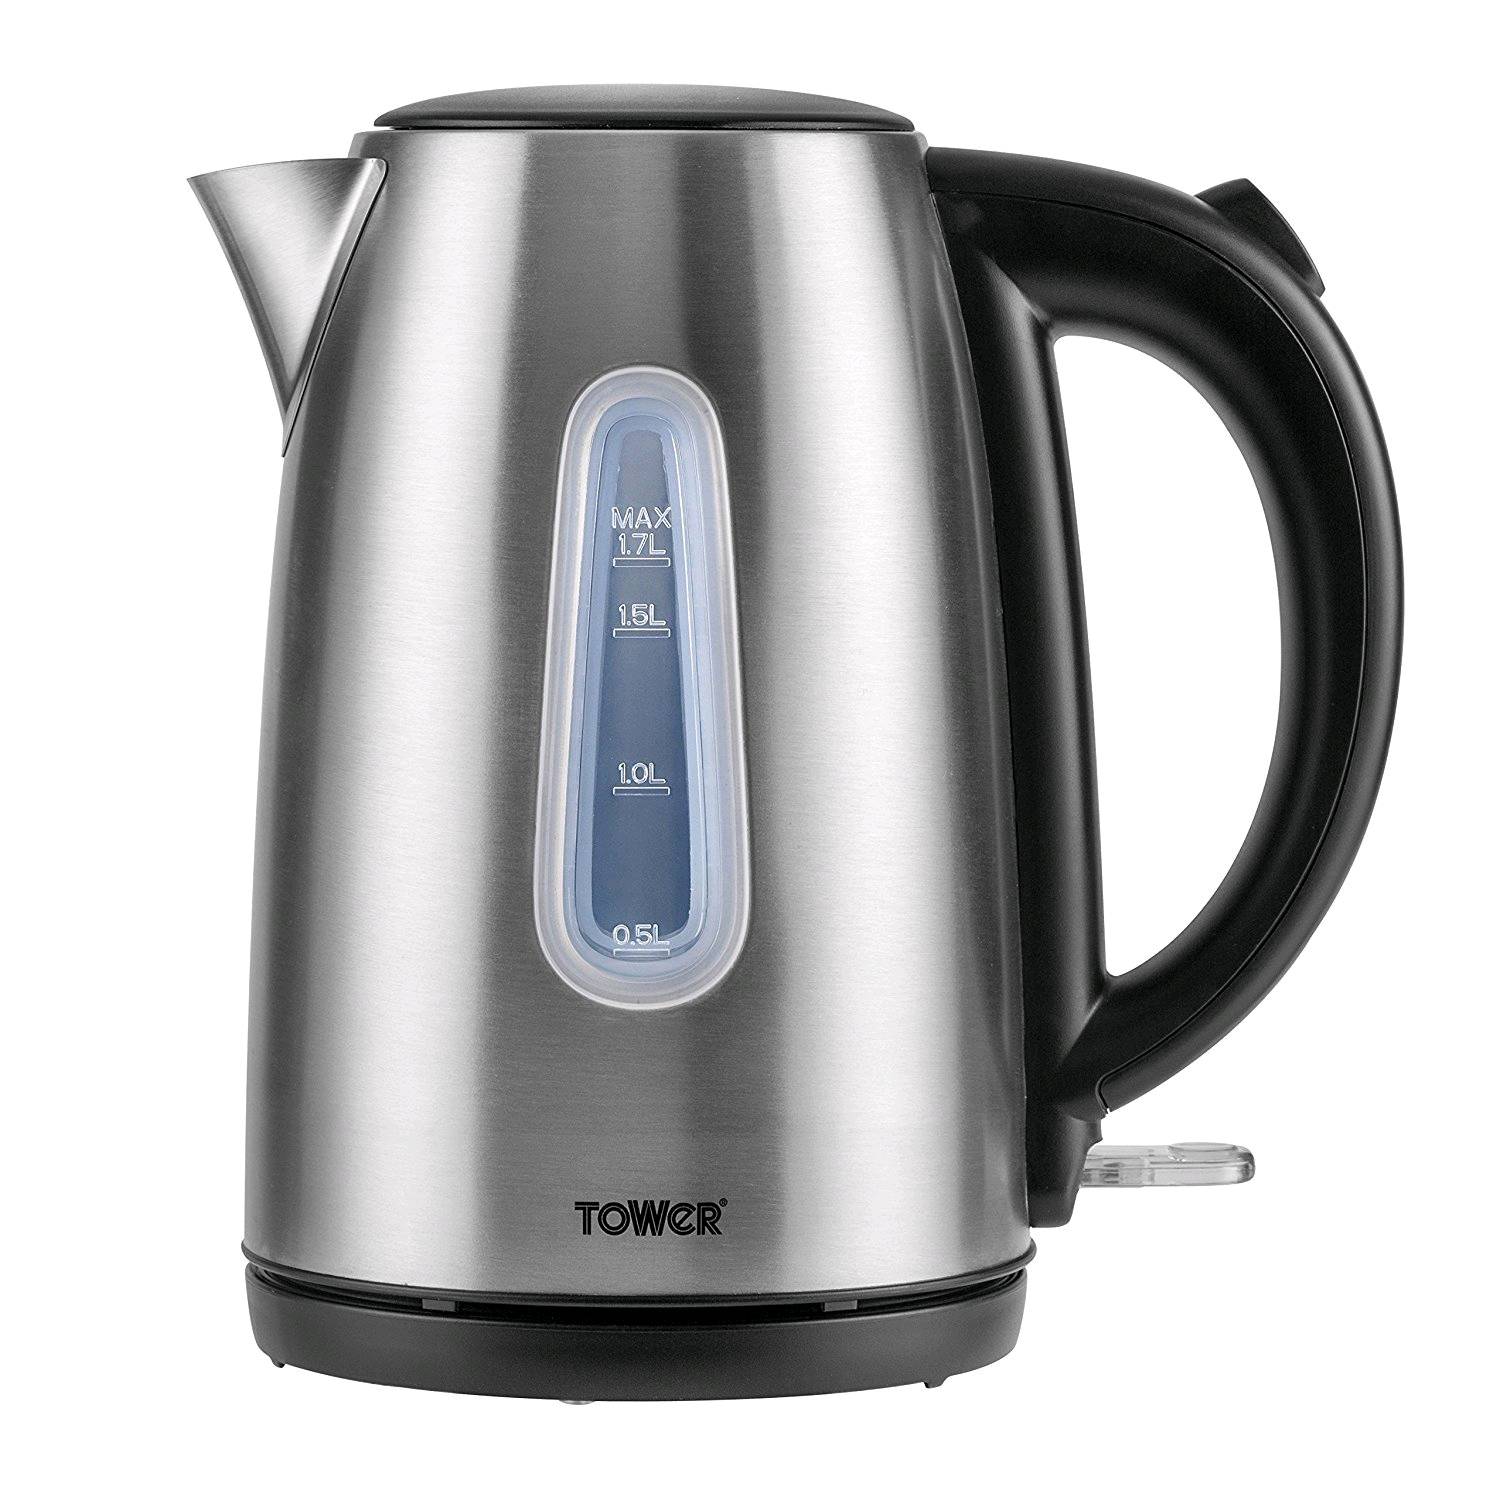 Tower Jug Kettle  Brushed Stainless Steel 3kw 1.7ltr